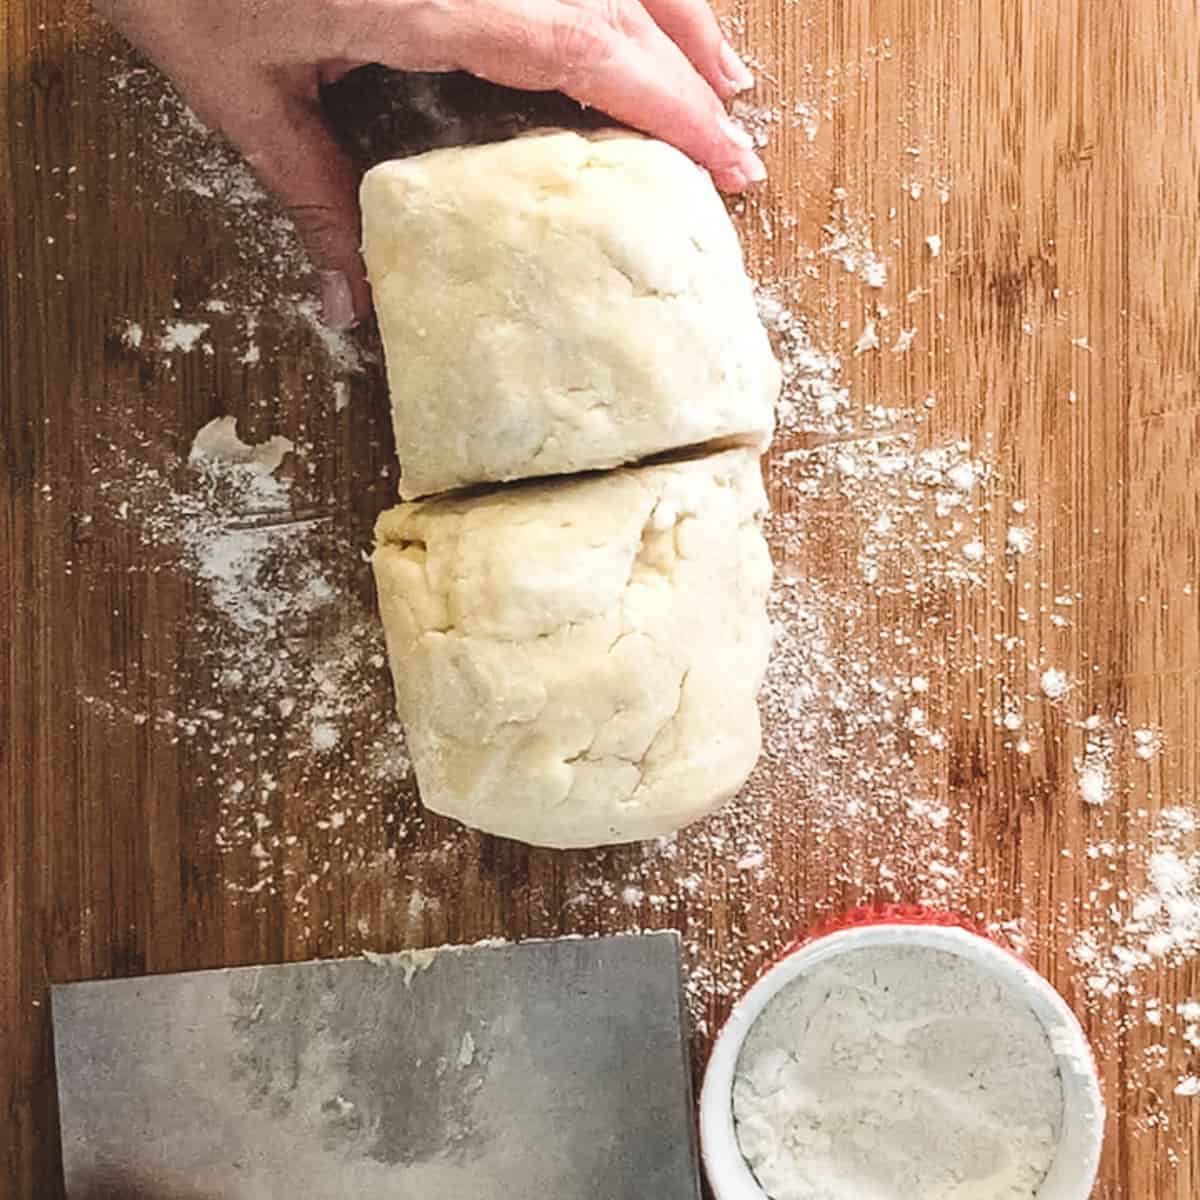 finished dough on a board shaped into a log and cut in half.